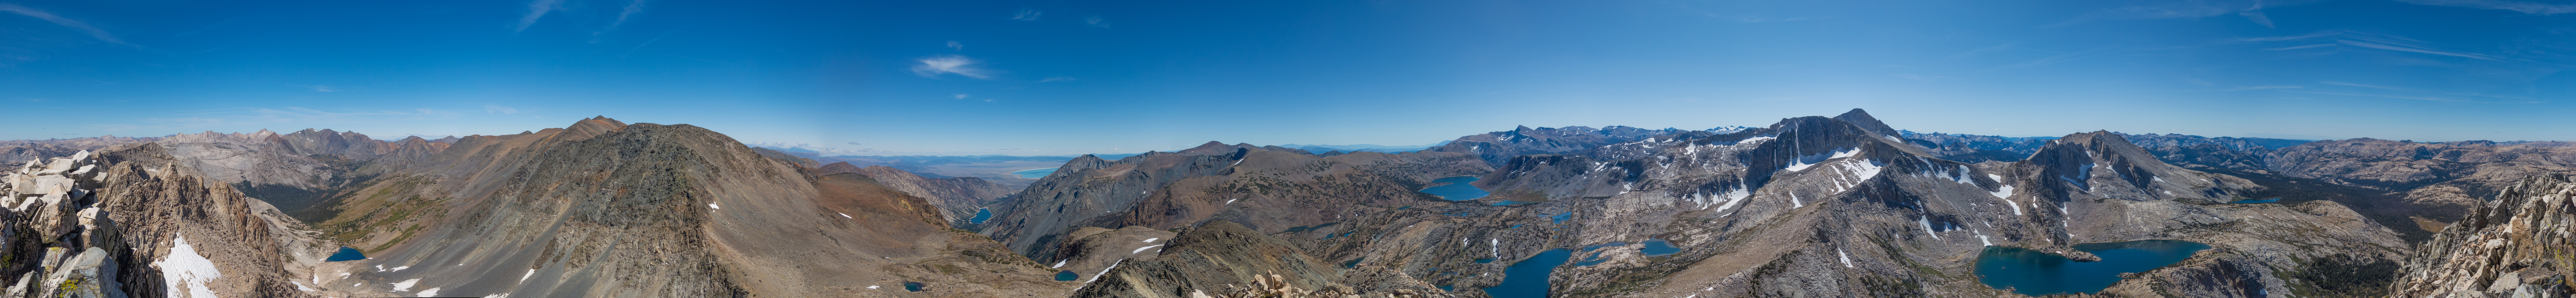 (l to r): west side of the East Summit (and high point of Shepherd Crest), Excelsior Mountain, Lundy Canyon, Mt. Warren, Saddlebag Lake, Mt. Dana, North Peak and Mt. Conness, Sheep Peak and Upper McCabe Lake.  Between Mt. Conness and Sheep Peak one can see the peaks of the Cathedral Range, including Half Dome at the right.